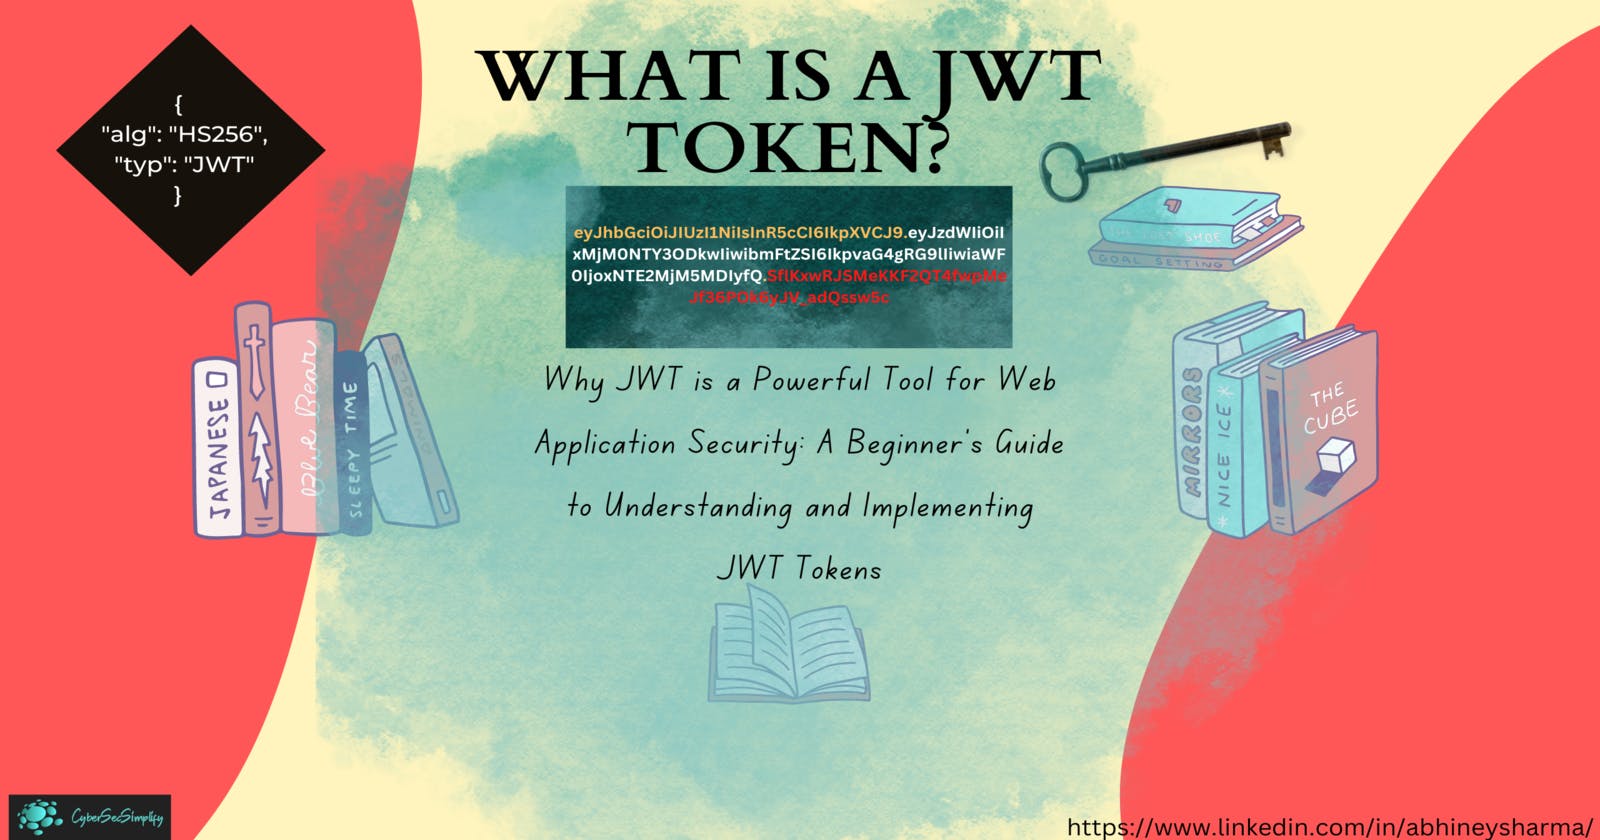 Why JWT is a Powerful Tool for Web Application Security: A Beginner's Guide to Understanding and Implementing JWT Tokens